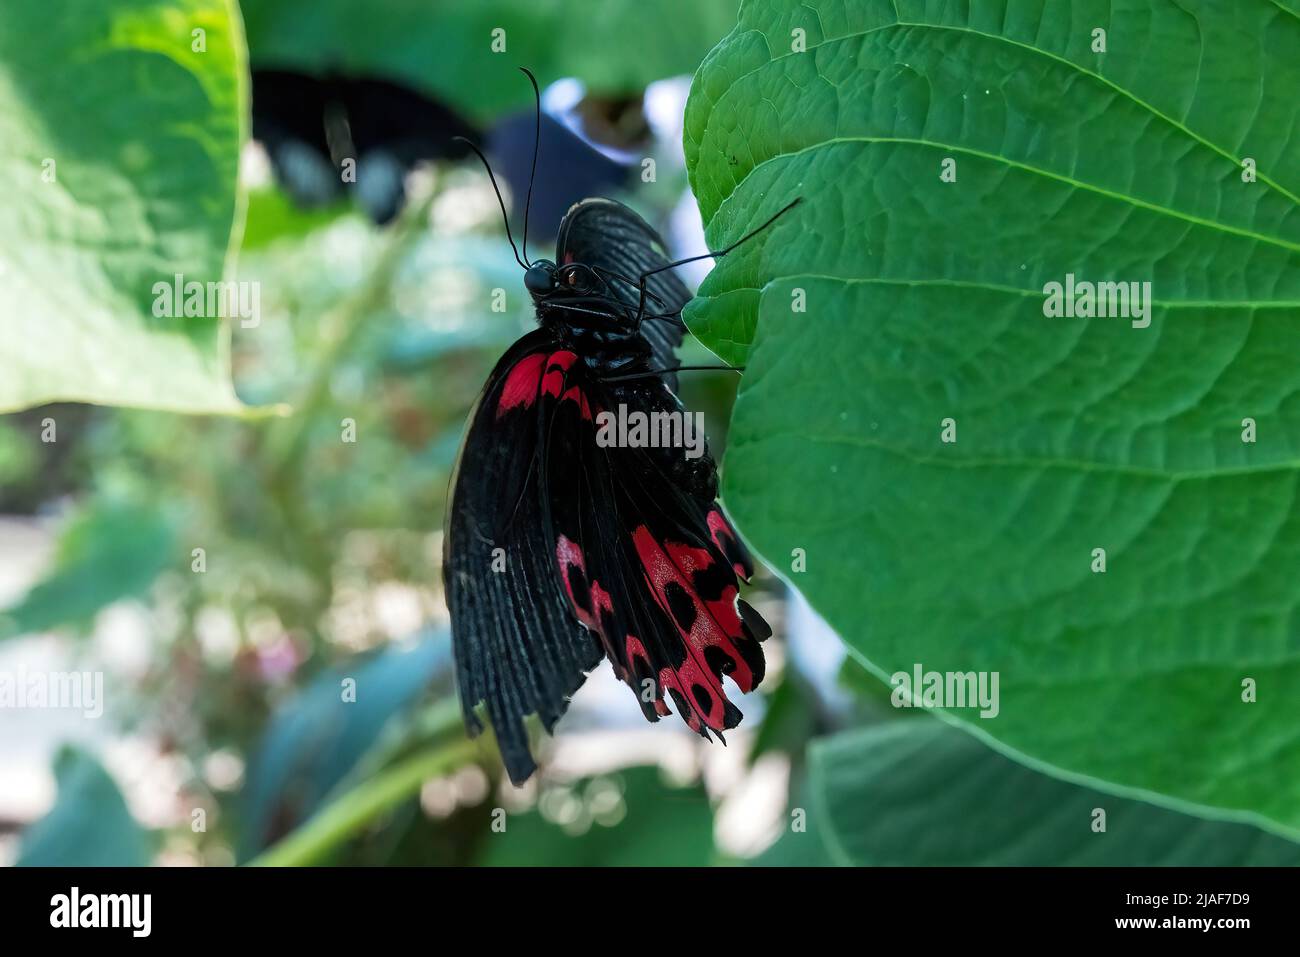 Scarlet Mormon Swallowtail Butterfly at Butterfly Garden, Middleton Common, Ditchling Common, East Sussex, Großbritannien. Stockfoto